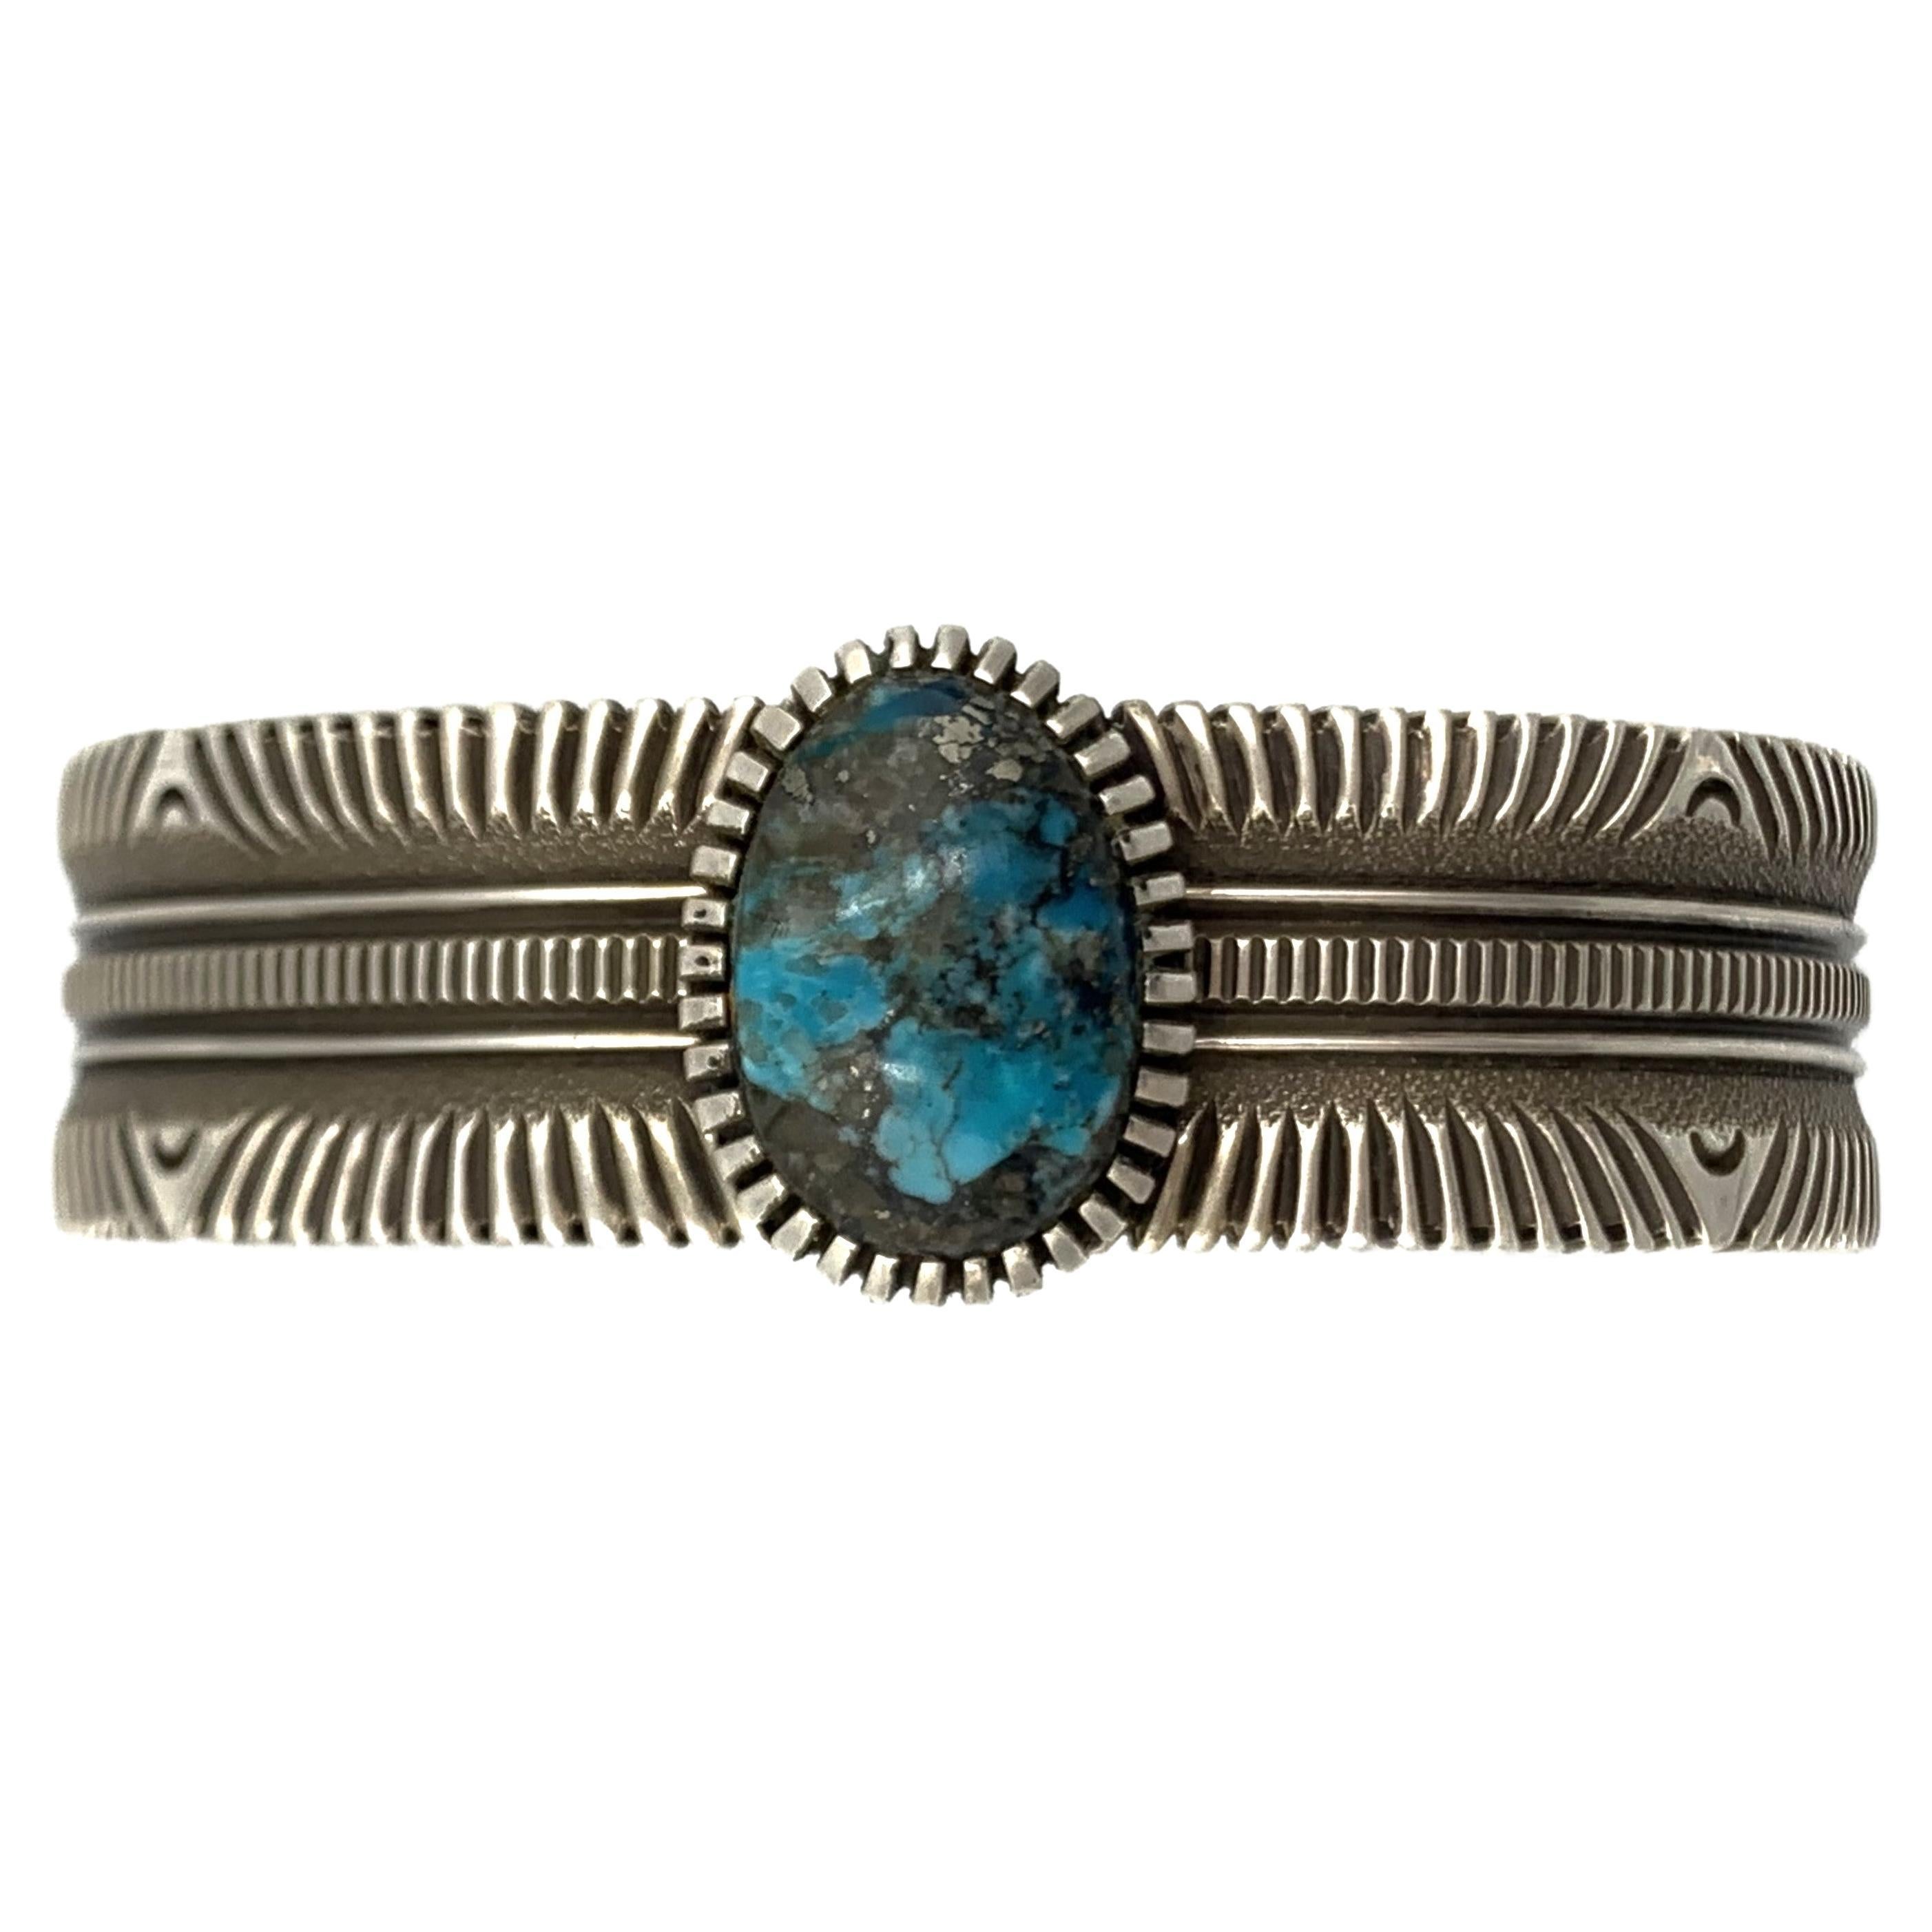 Bisbee Turquoise Cuff by Ron Bedoni For Sale